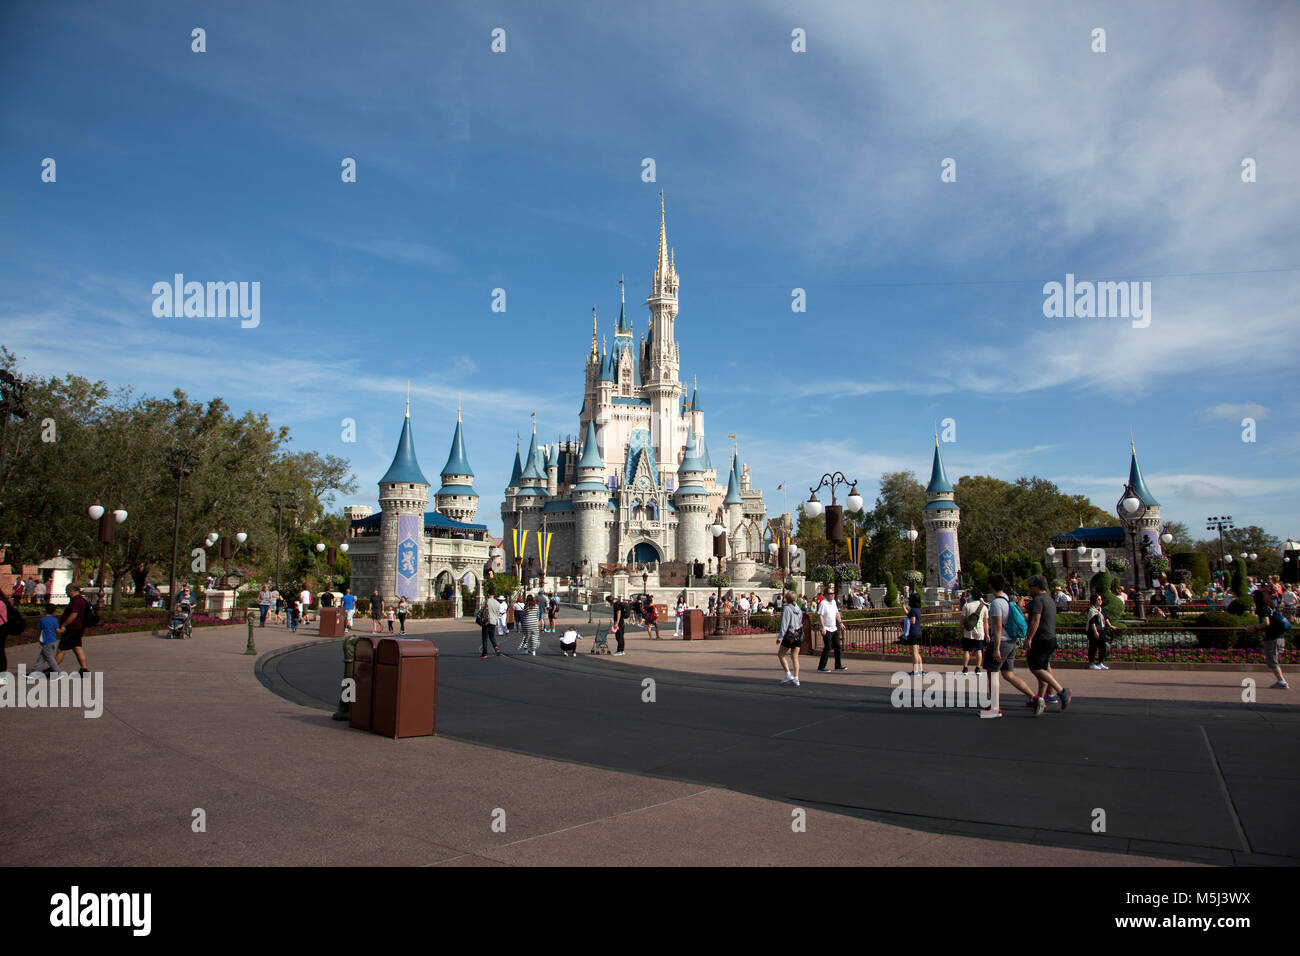 Orlando, Florida- February 7, 2018: crowds of people in front of the famous Cinderella Castle at Walt Disney World Stock Photo